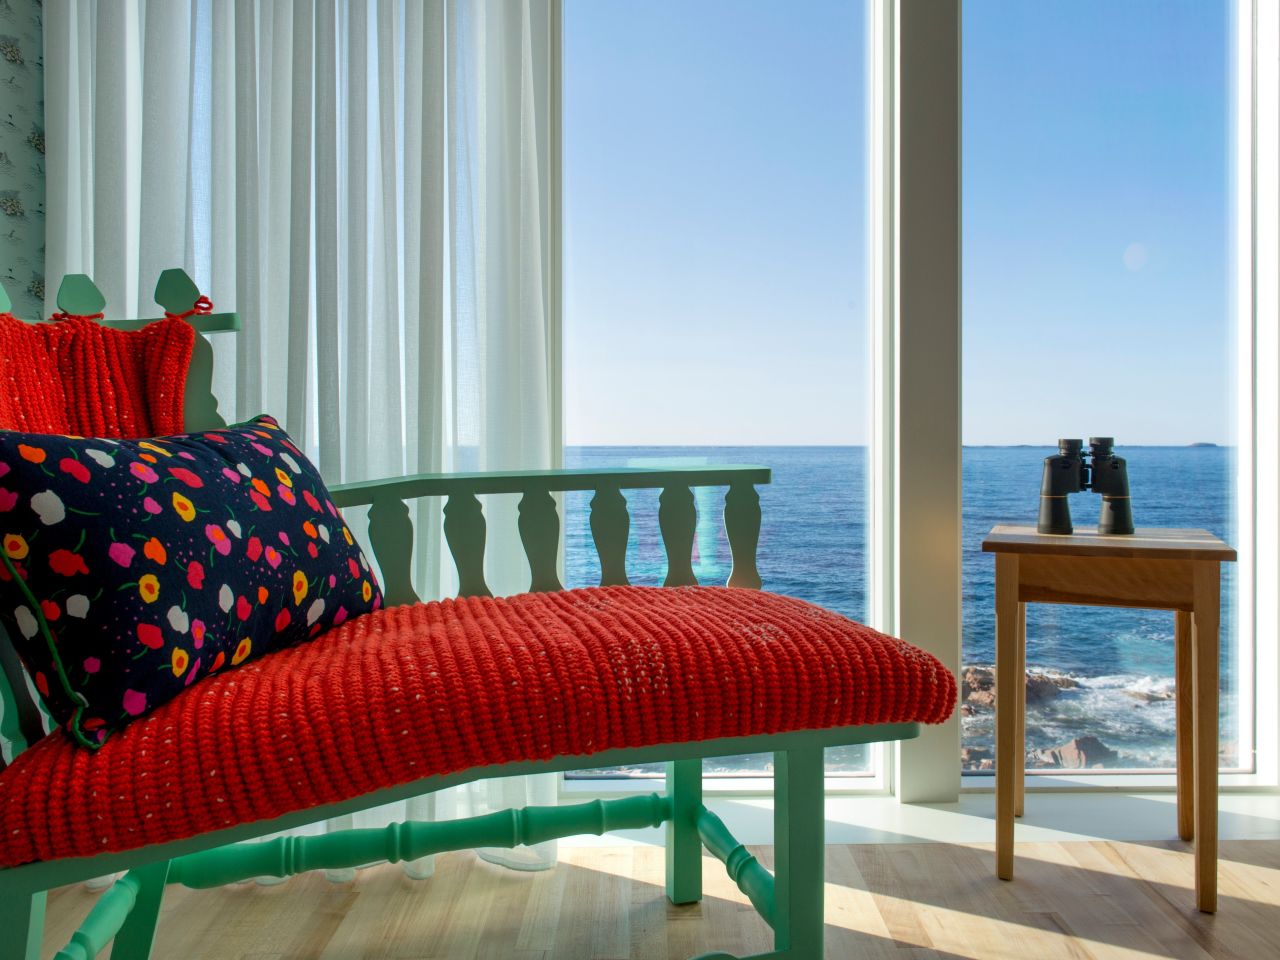 Each of the inn's 29 suites features floor-to-ceiling views of the dramatic seascape beyond.